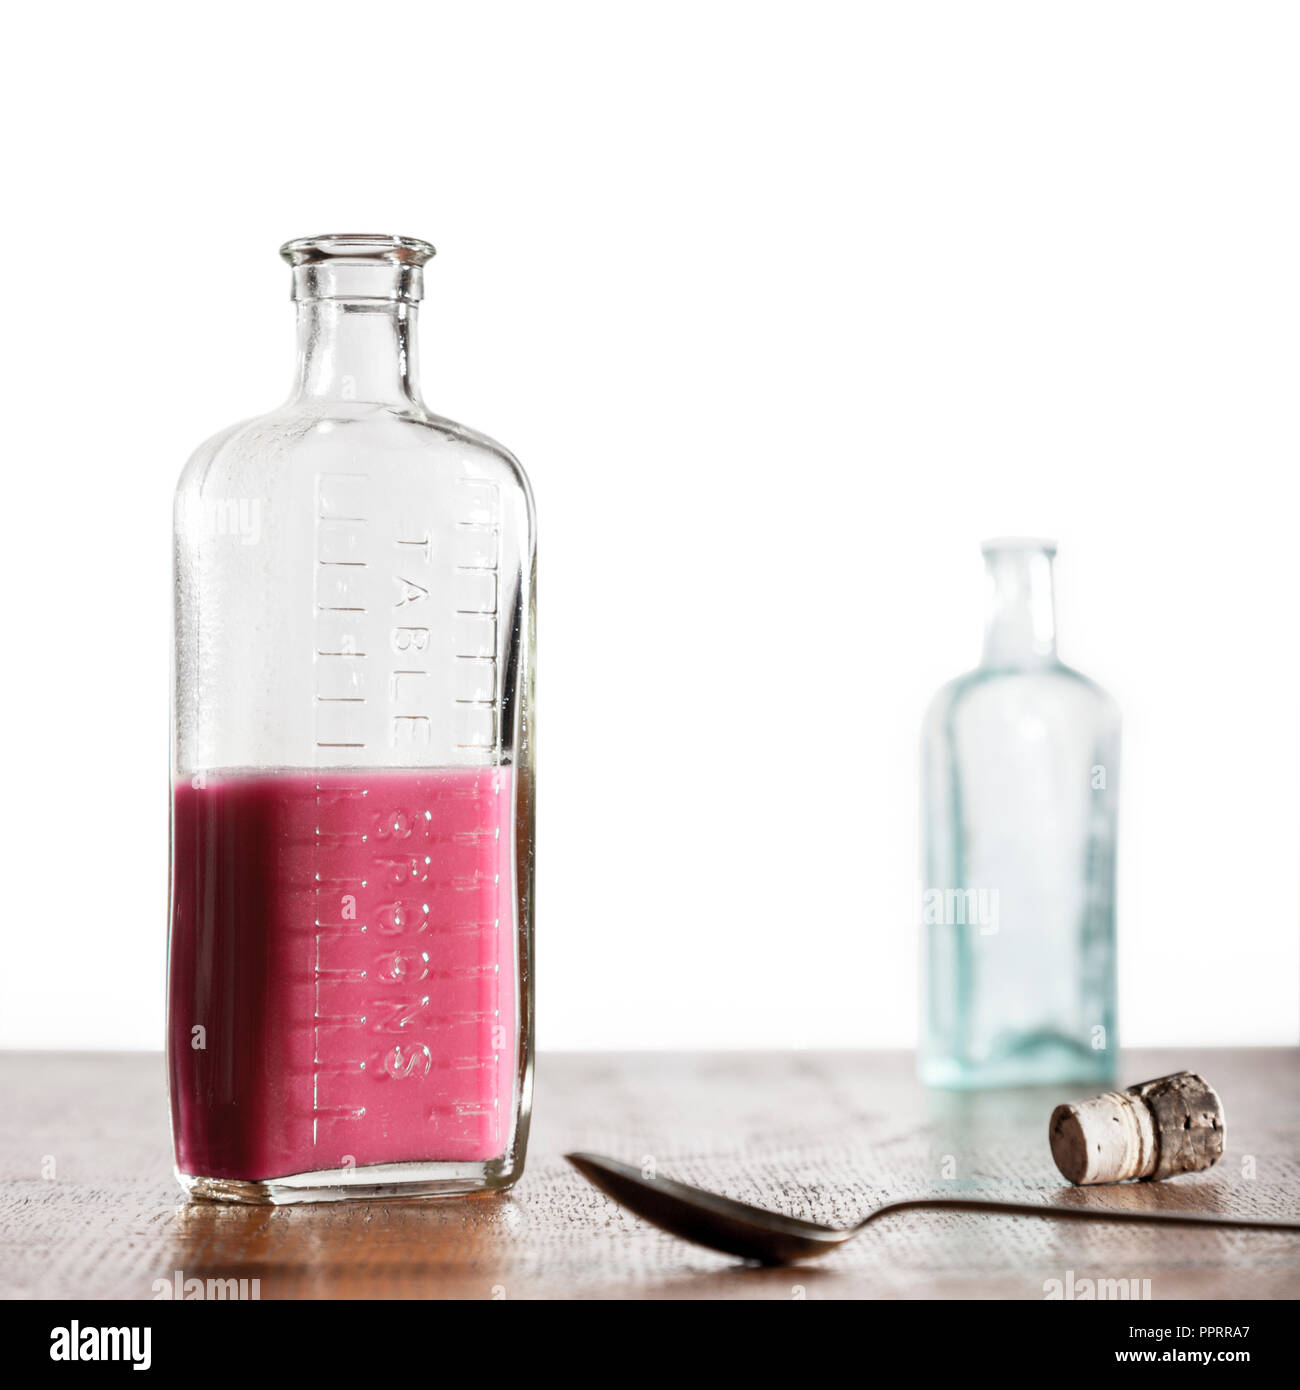 Two bottles. One half full old medicine bottle with a spoon on a wooden surface with a second empty bottle in the background. Stock Photo